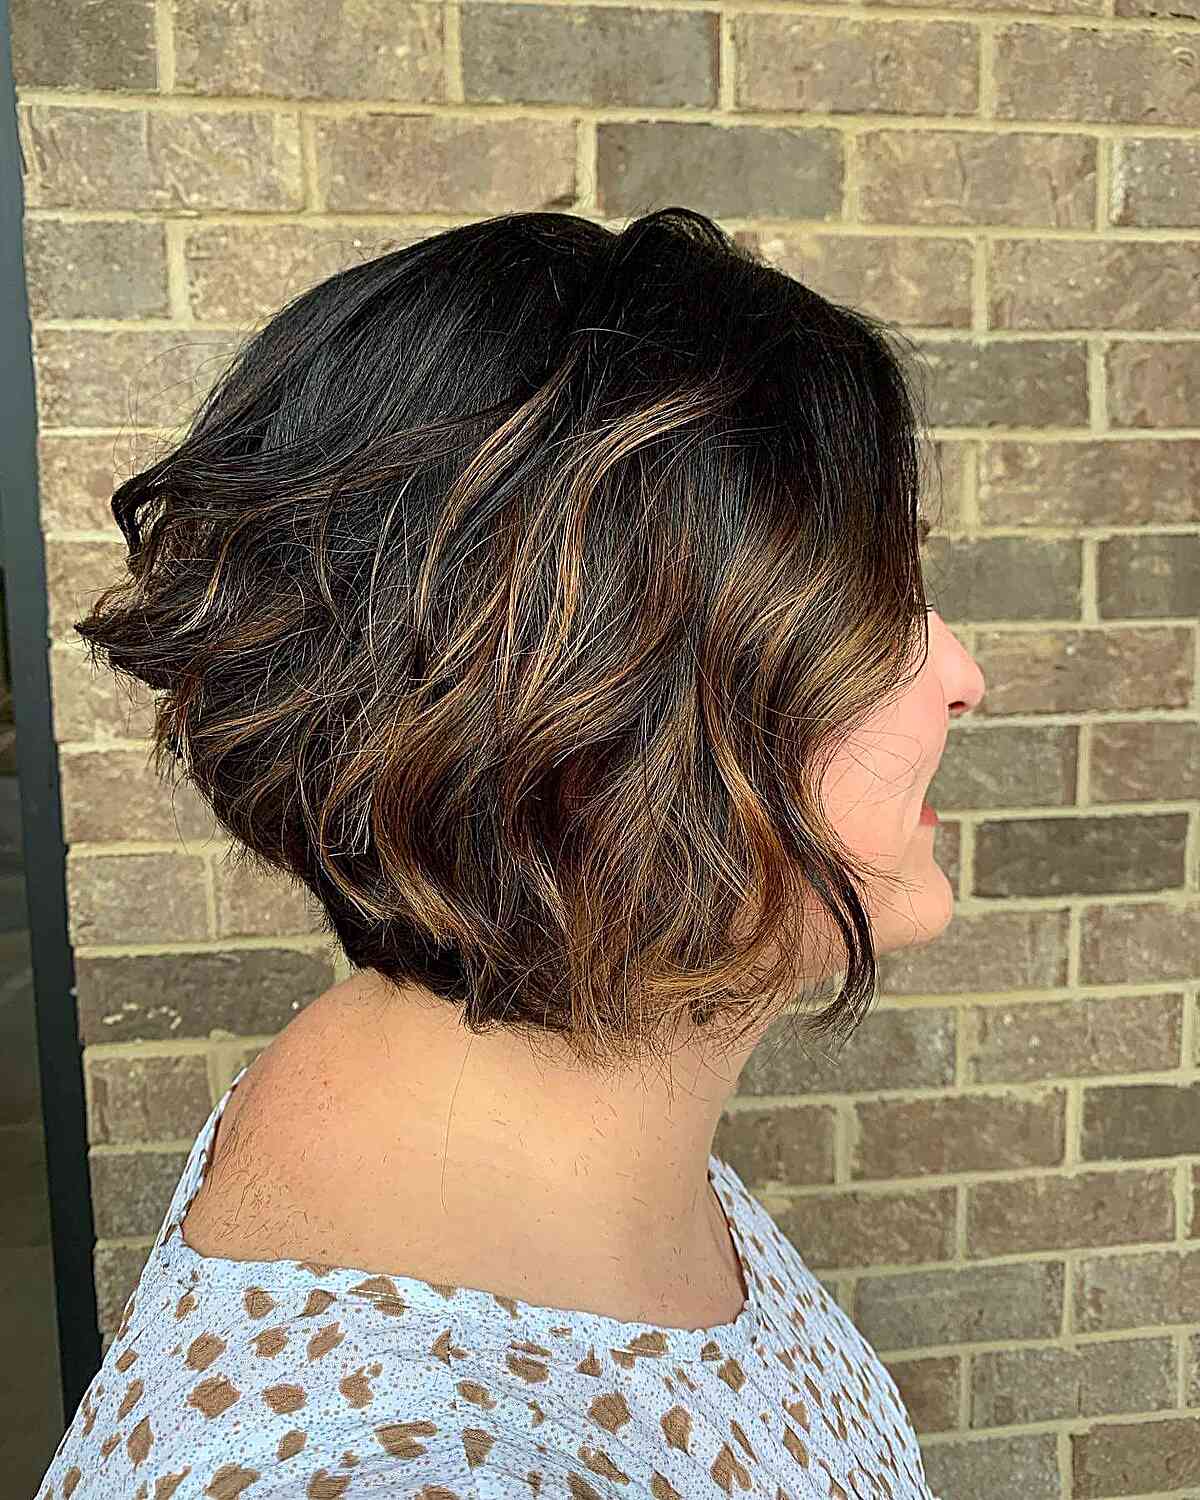 Short A-Line Dark Hair with Caramel Highlights and Textured Waves